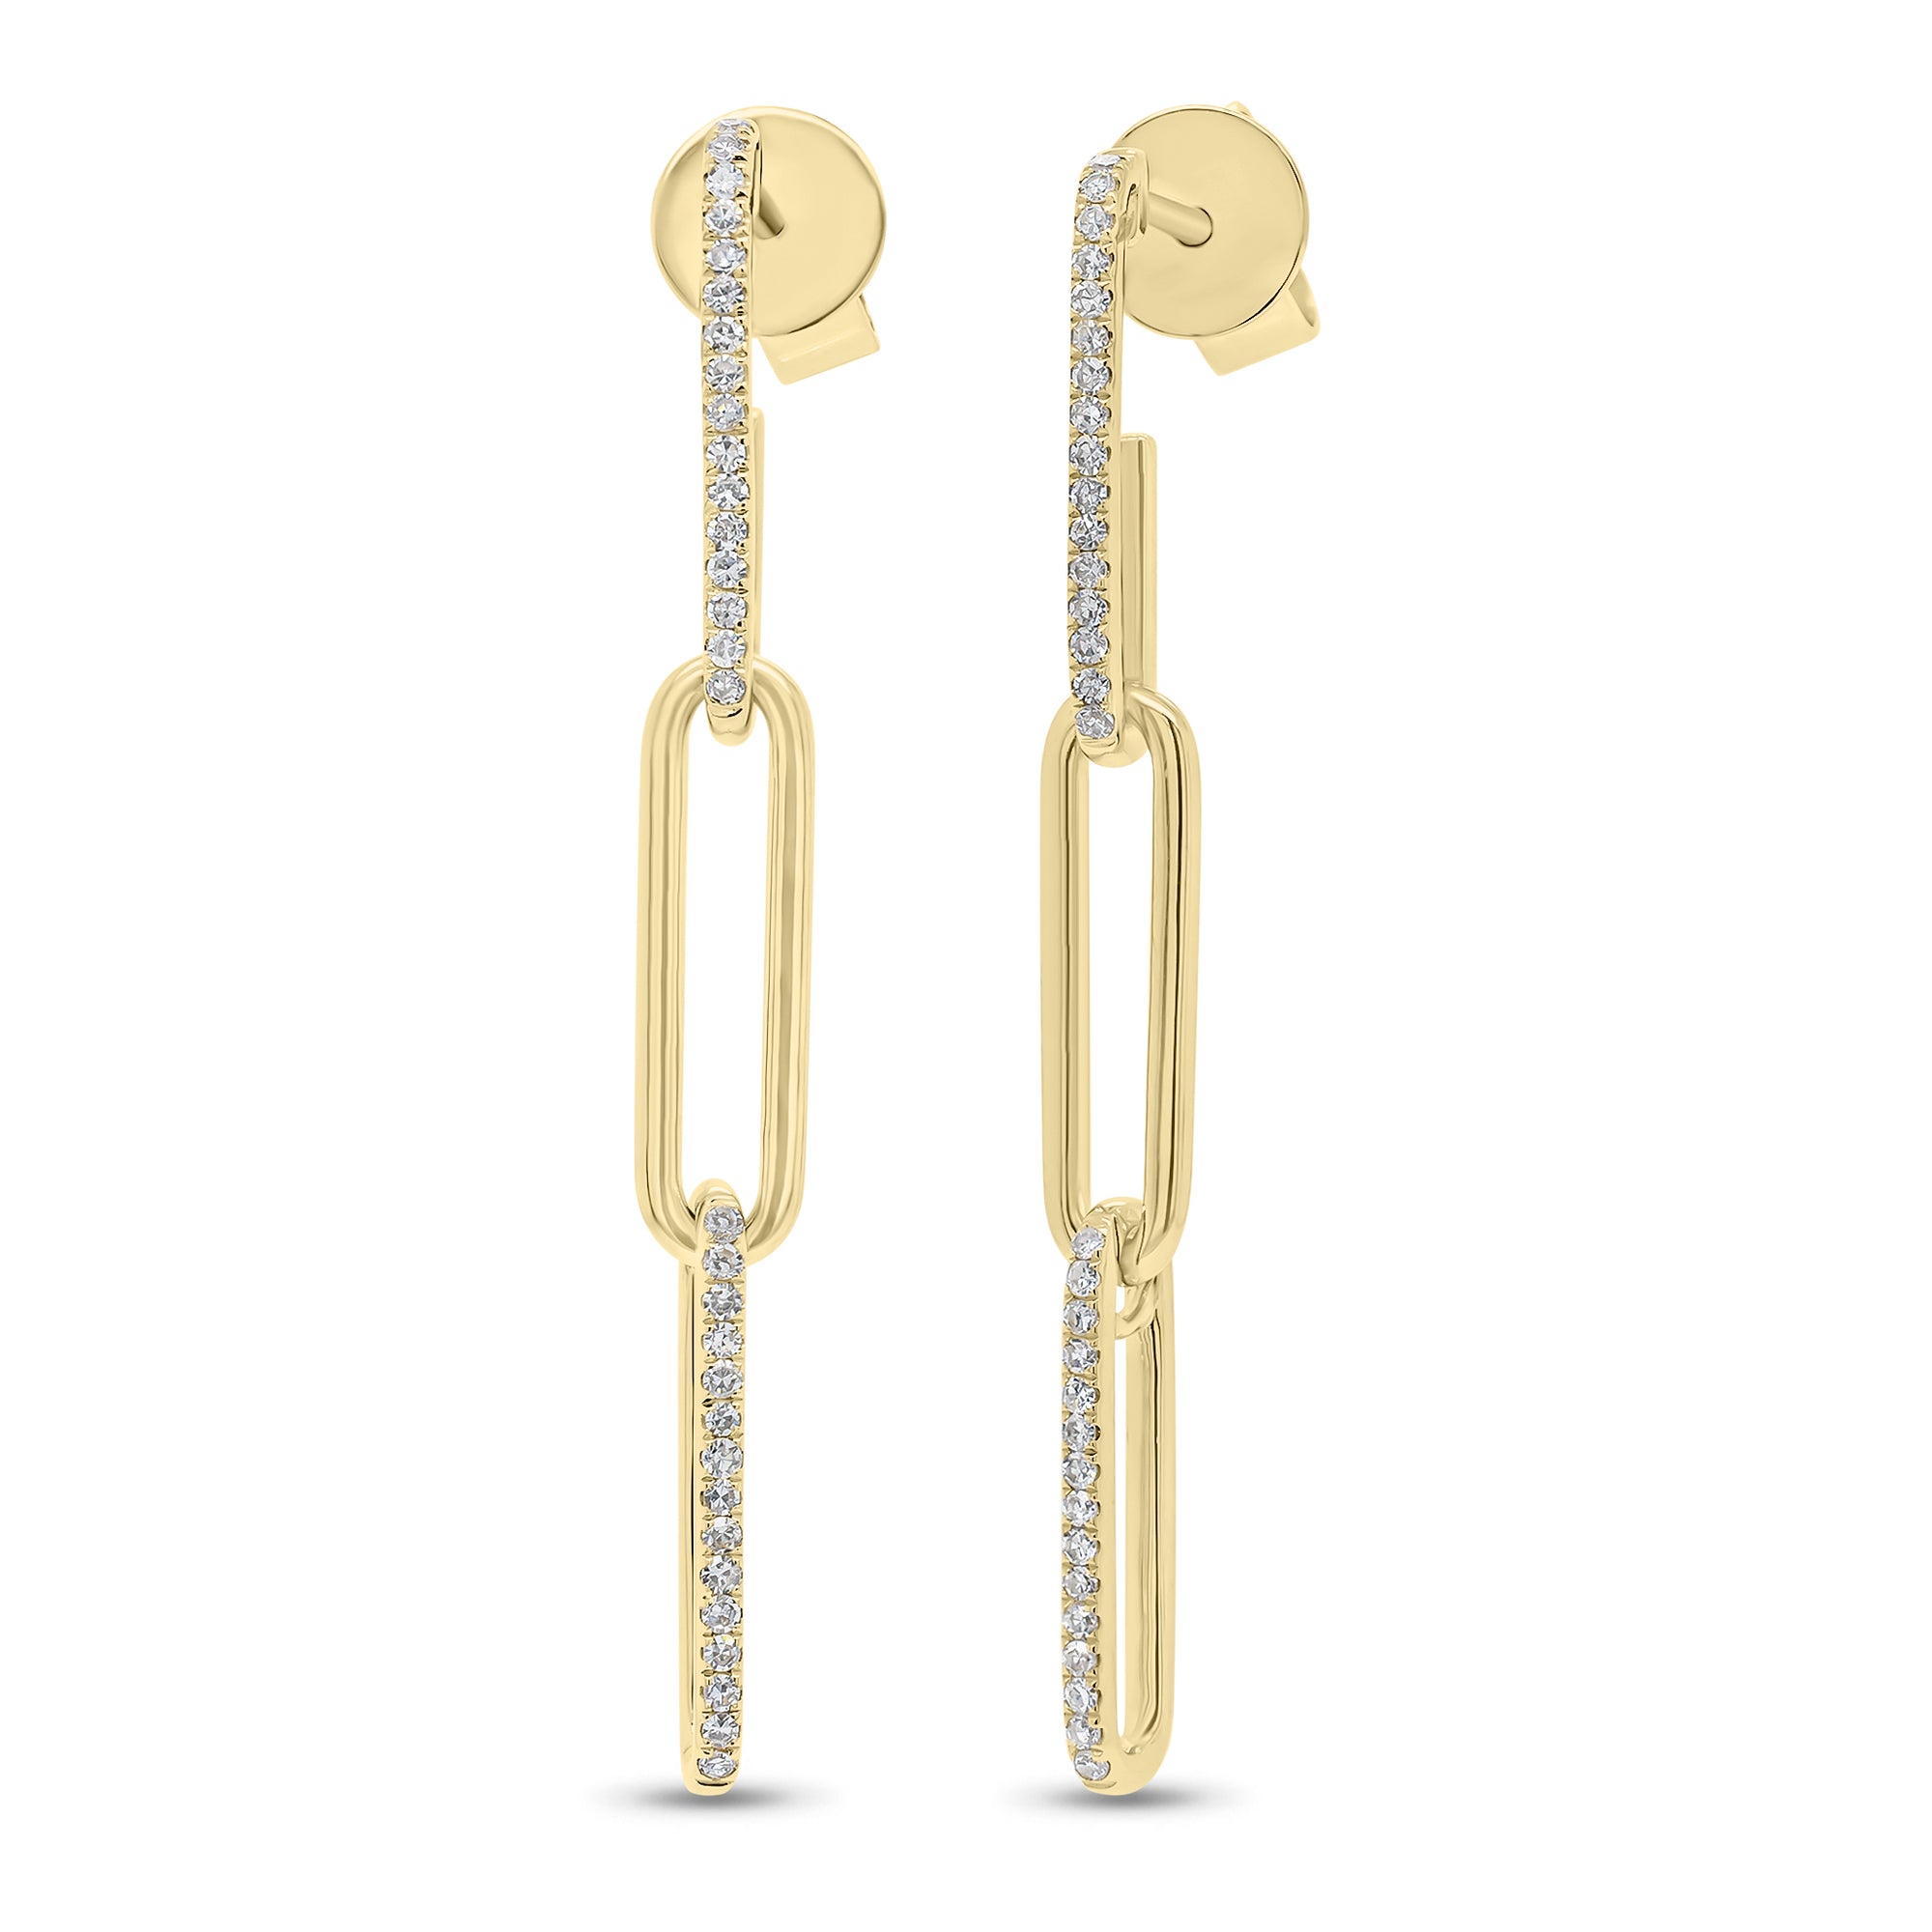 Diamond Paperclip Chain Earrings - 14K gold weighing 2.64 grams  - 62 round diamonds weighing 0.18 carats